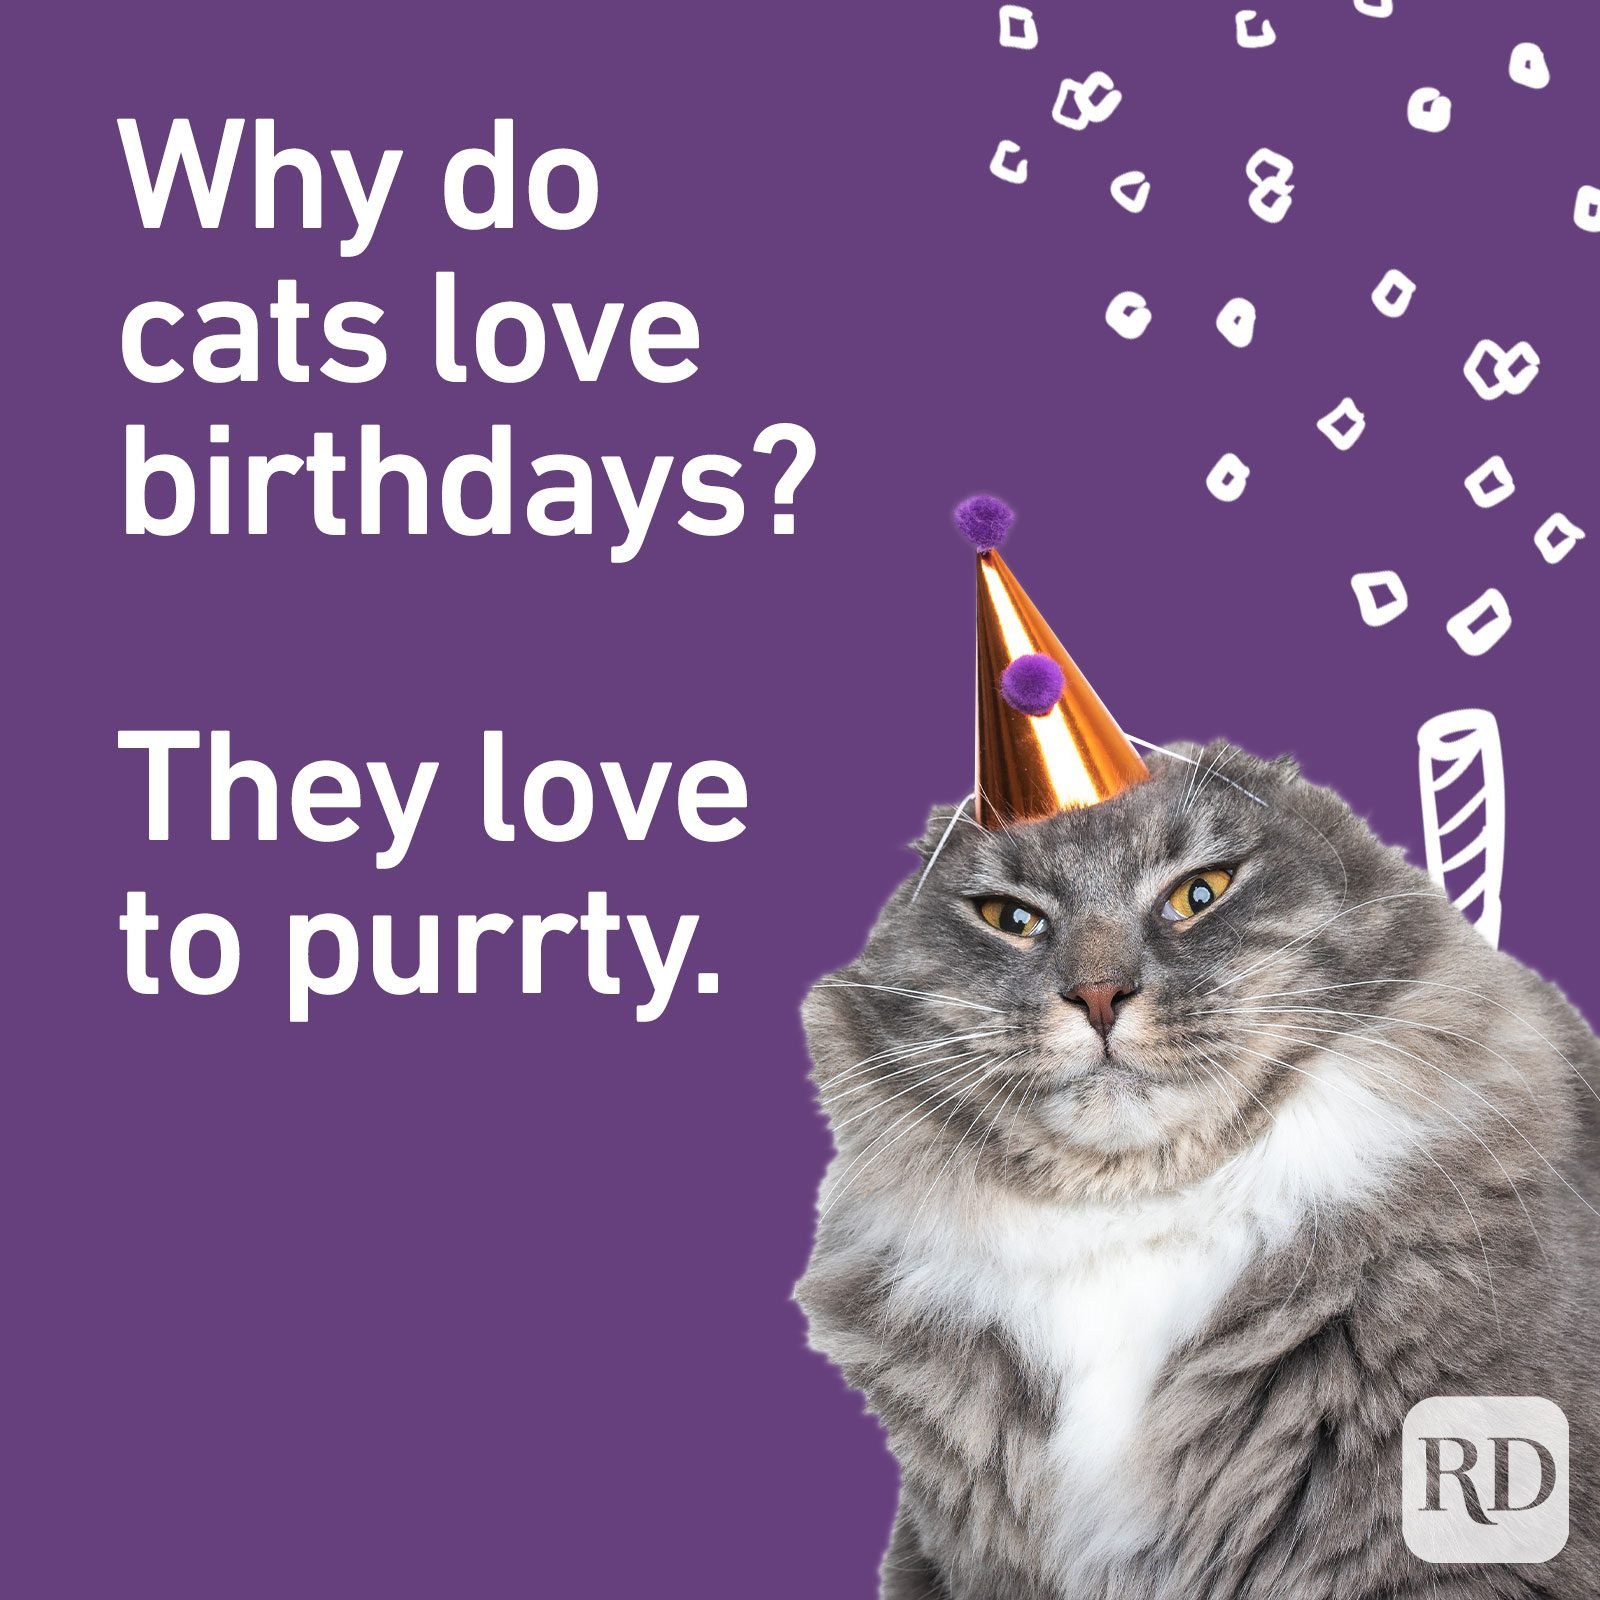 Why do cats love birthdays? They love to purrty.